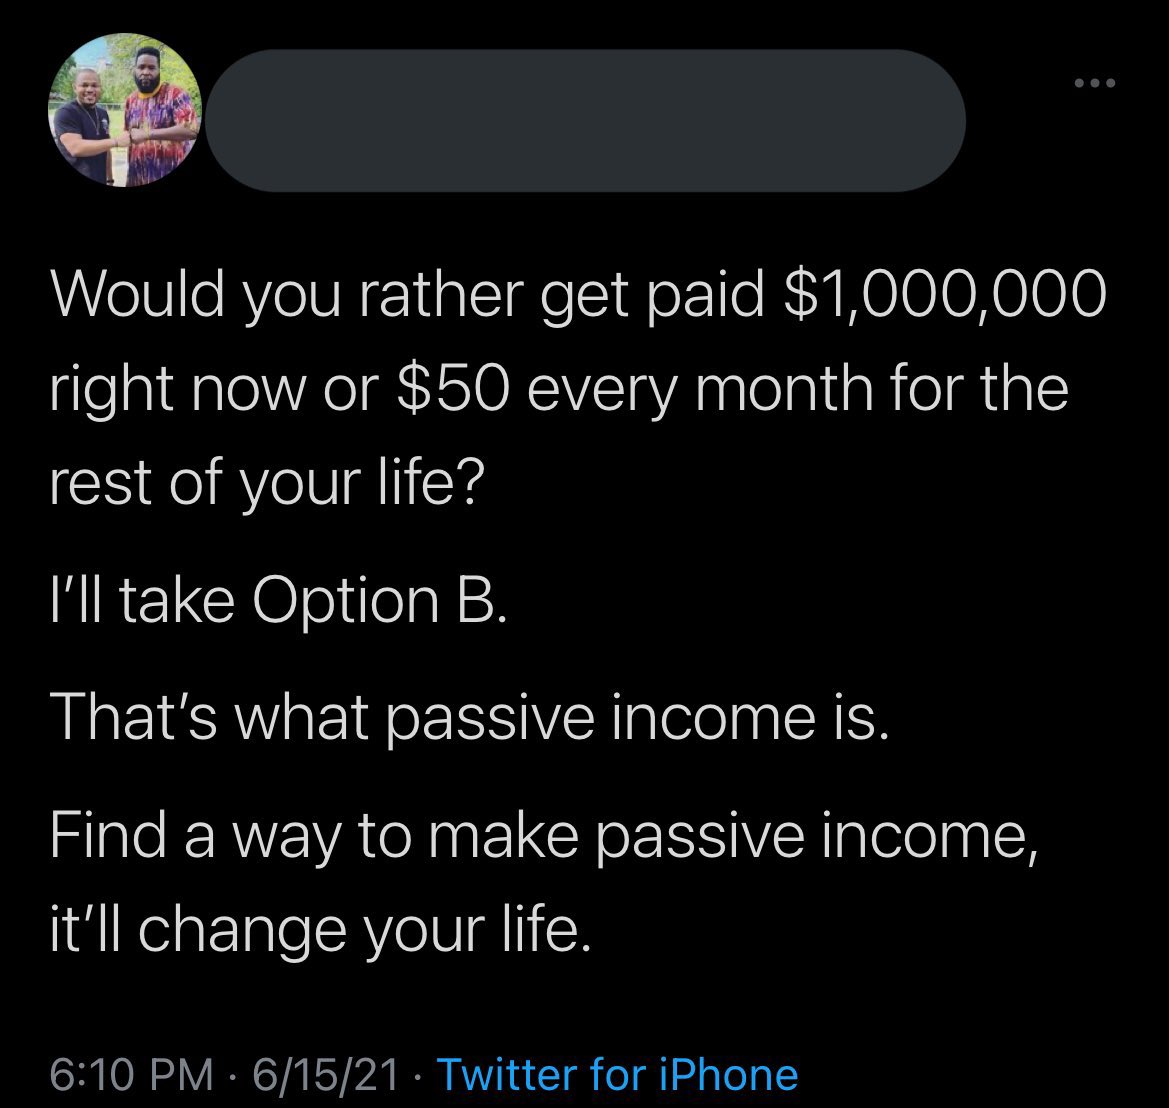 wtf tweets - atmosphere - Would you rather get paid $1,000,000 right now or $50 every month for the rest of your life? I'll take Option B. That's what passive income is. Find a way to make passive income, it'll change your life. 61521 Twitter for iPhone